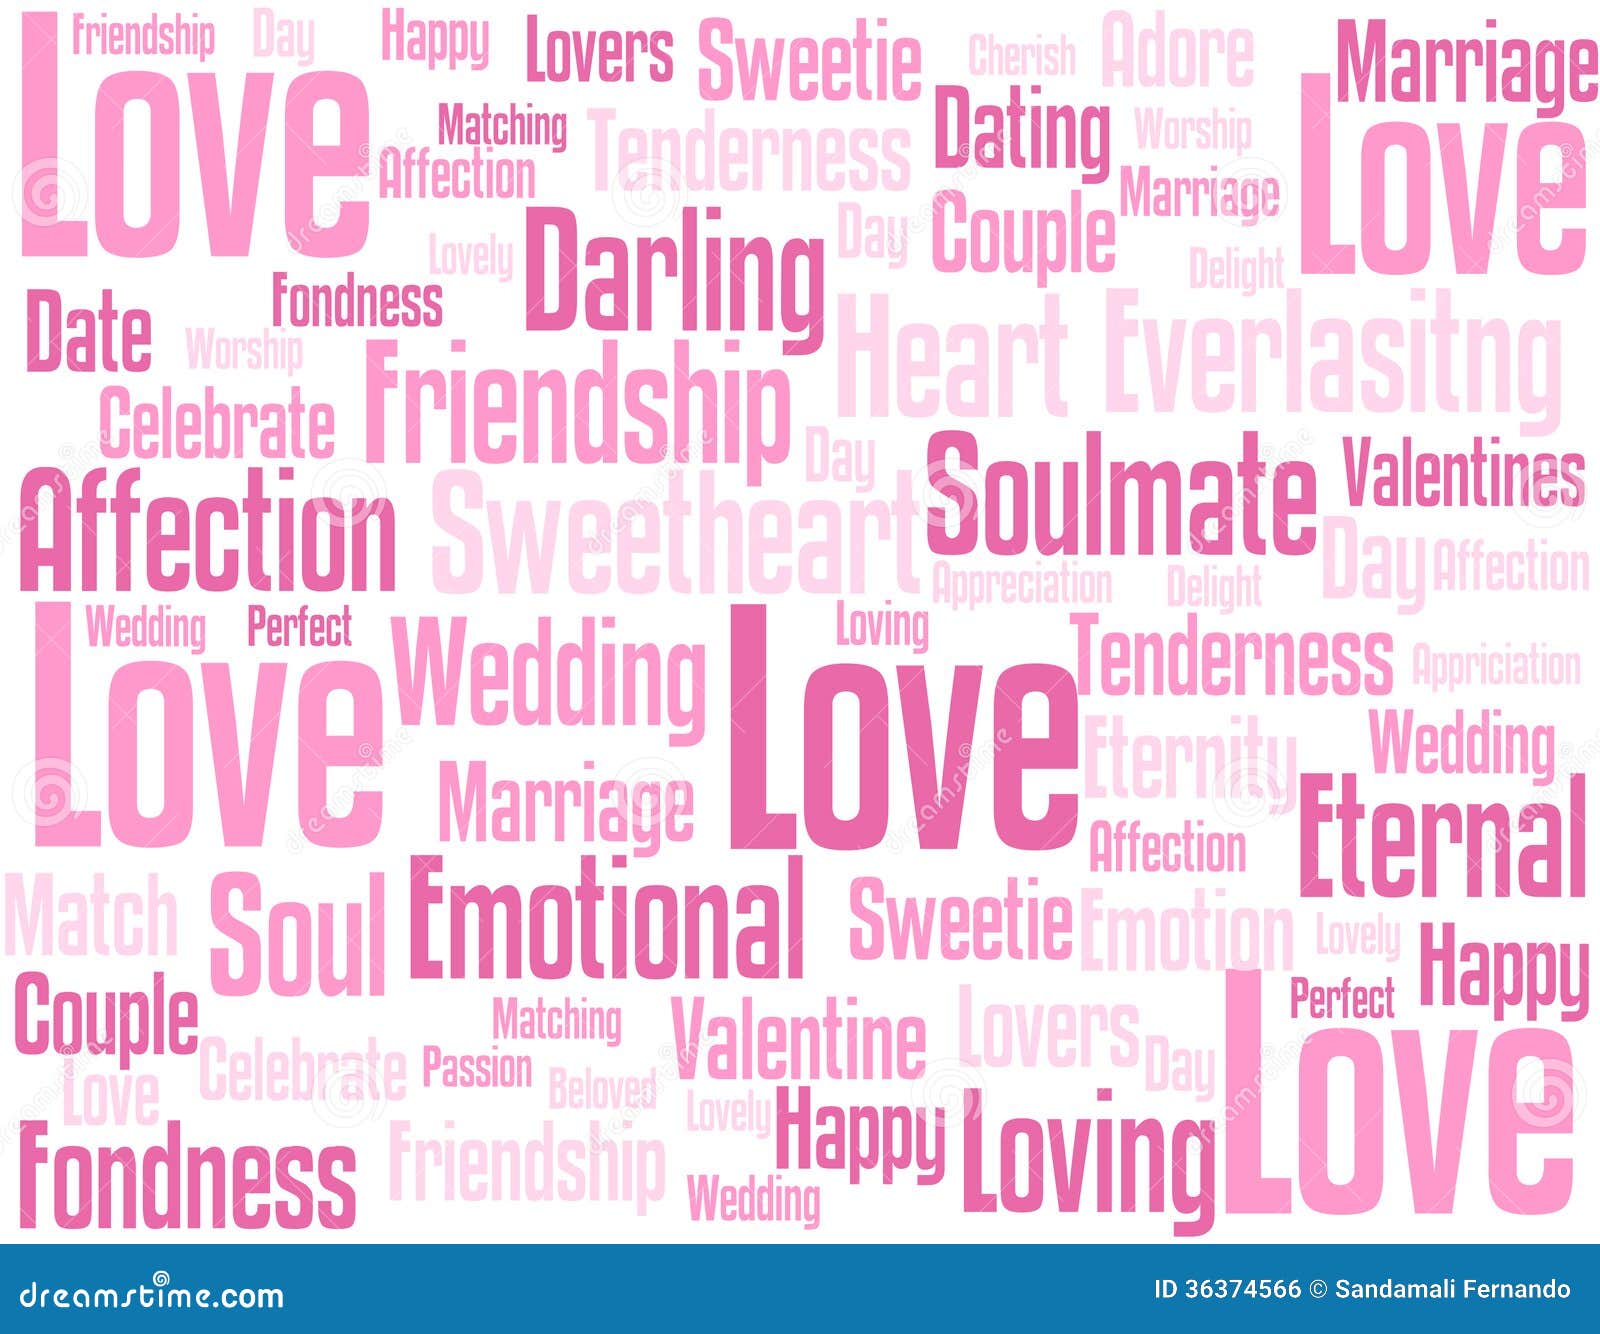 Love Wordcloud Background Royalty Free Stock Image - Image: 36374566